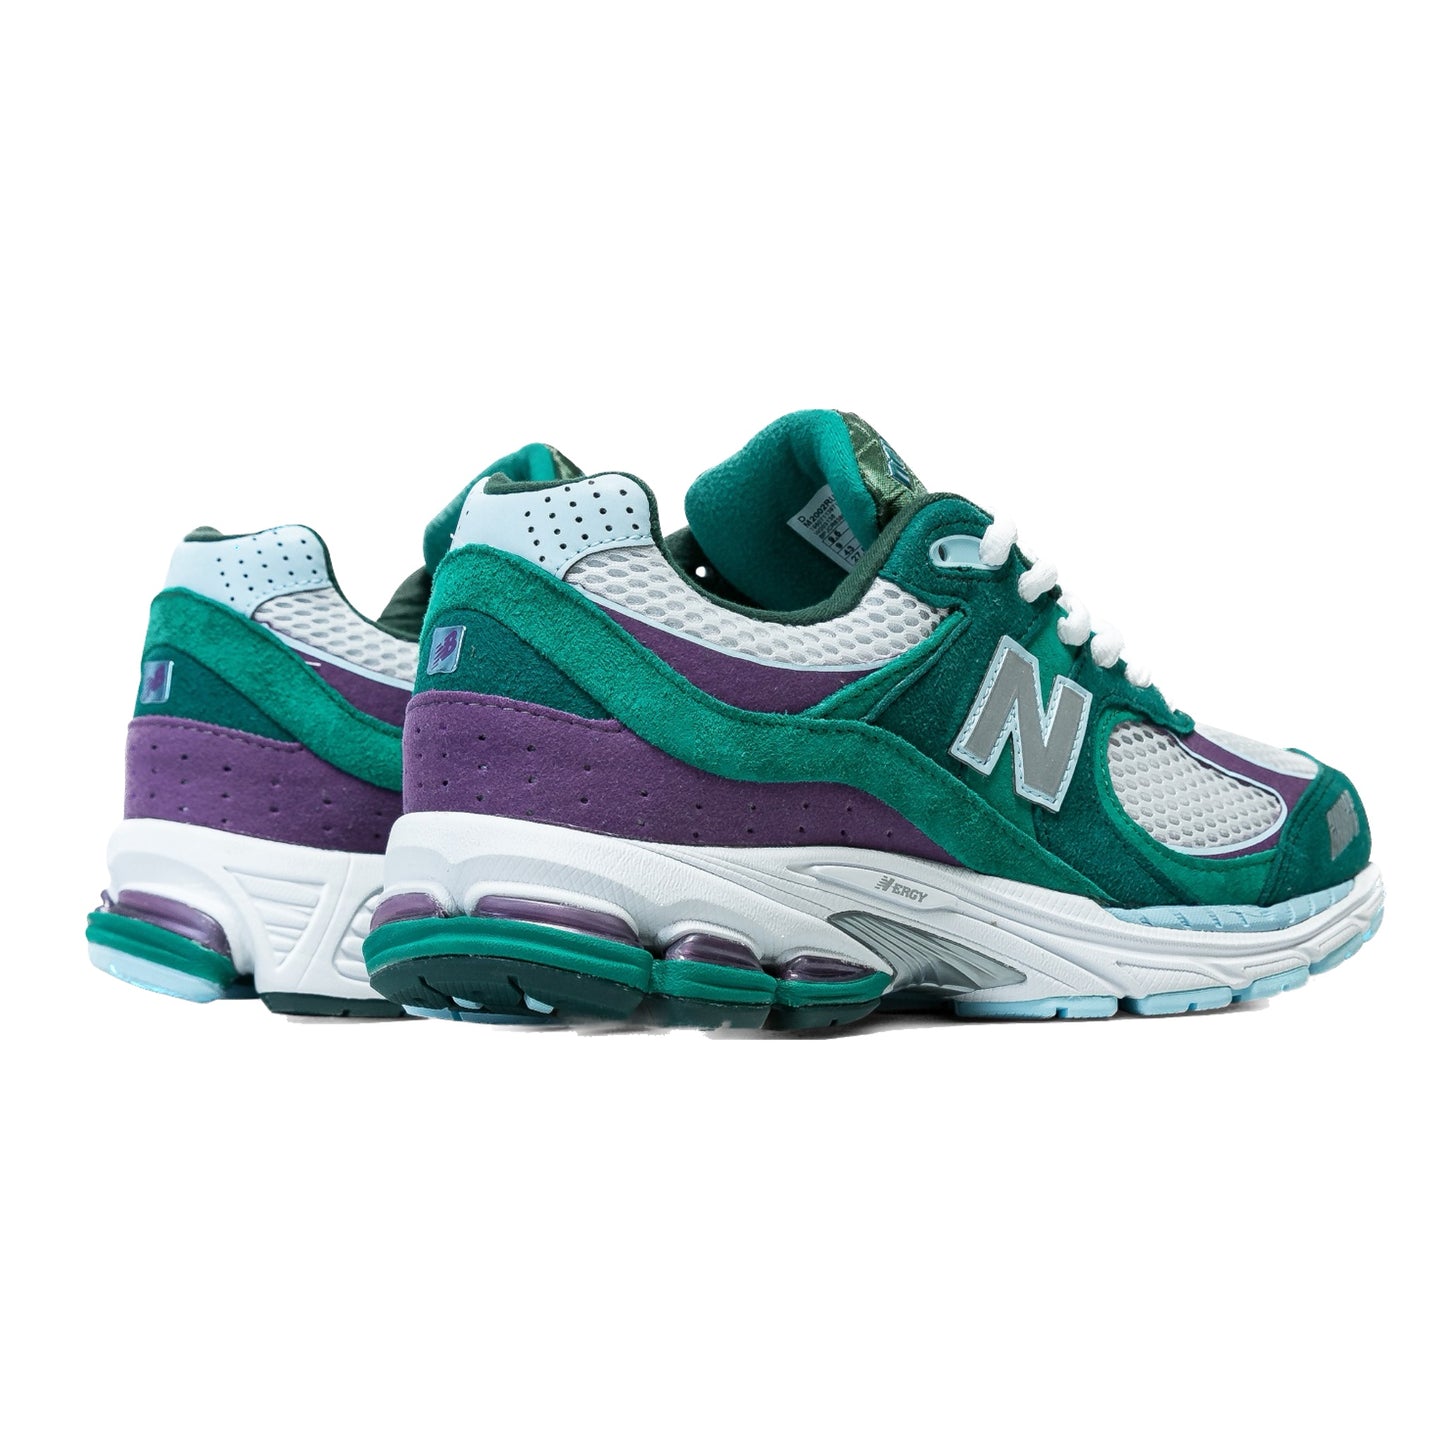 New Balance 2002R Up There Backyeard Legends Green Purple Grey